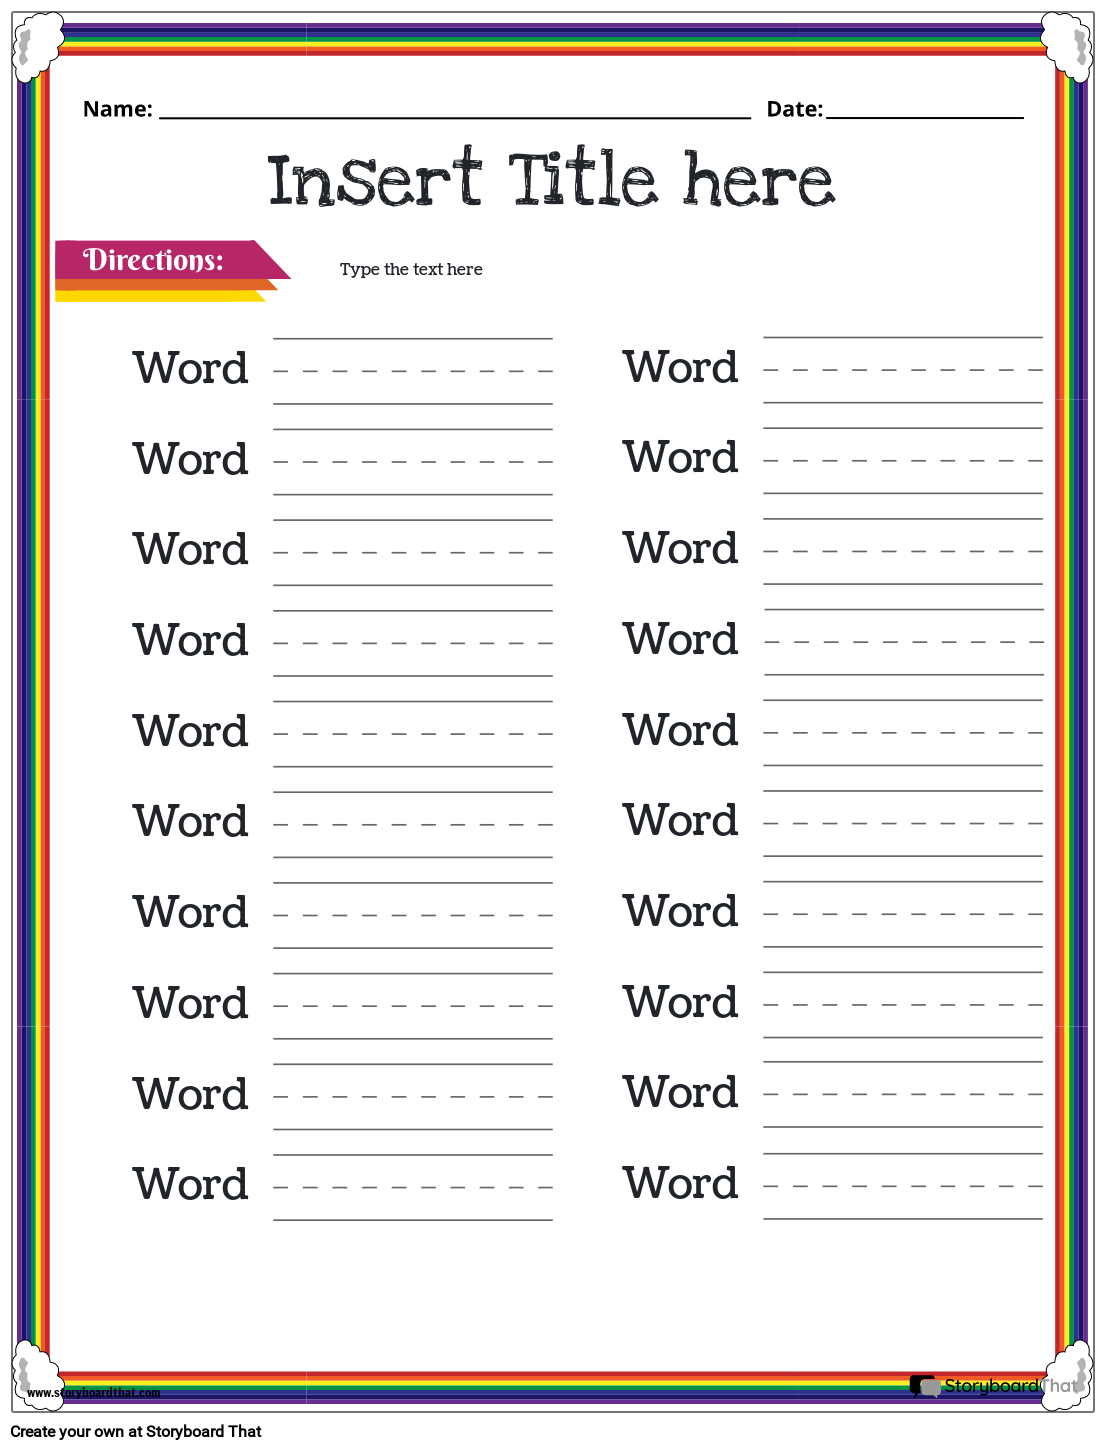 English Language Two Words Template